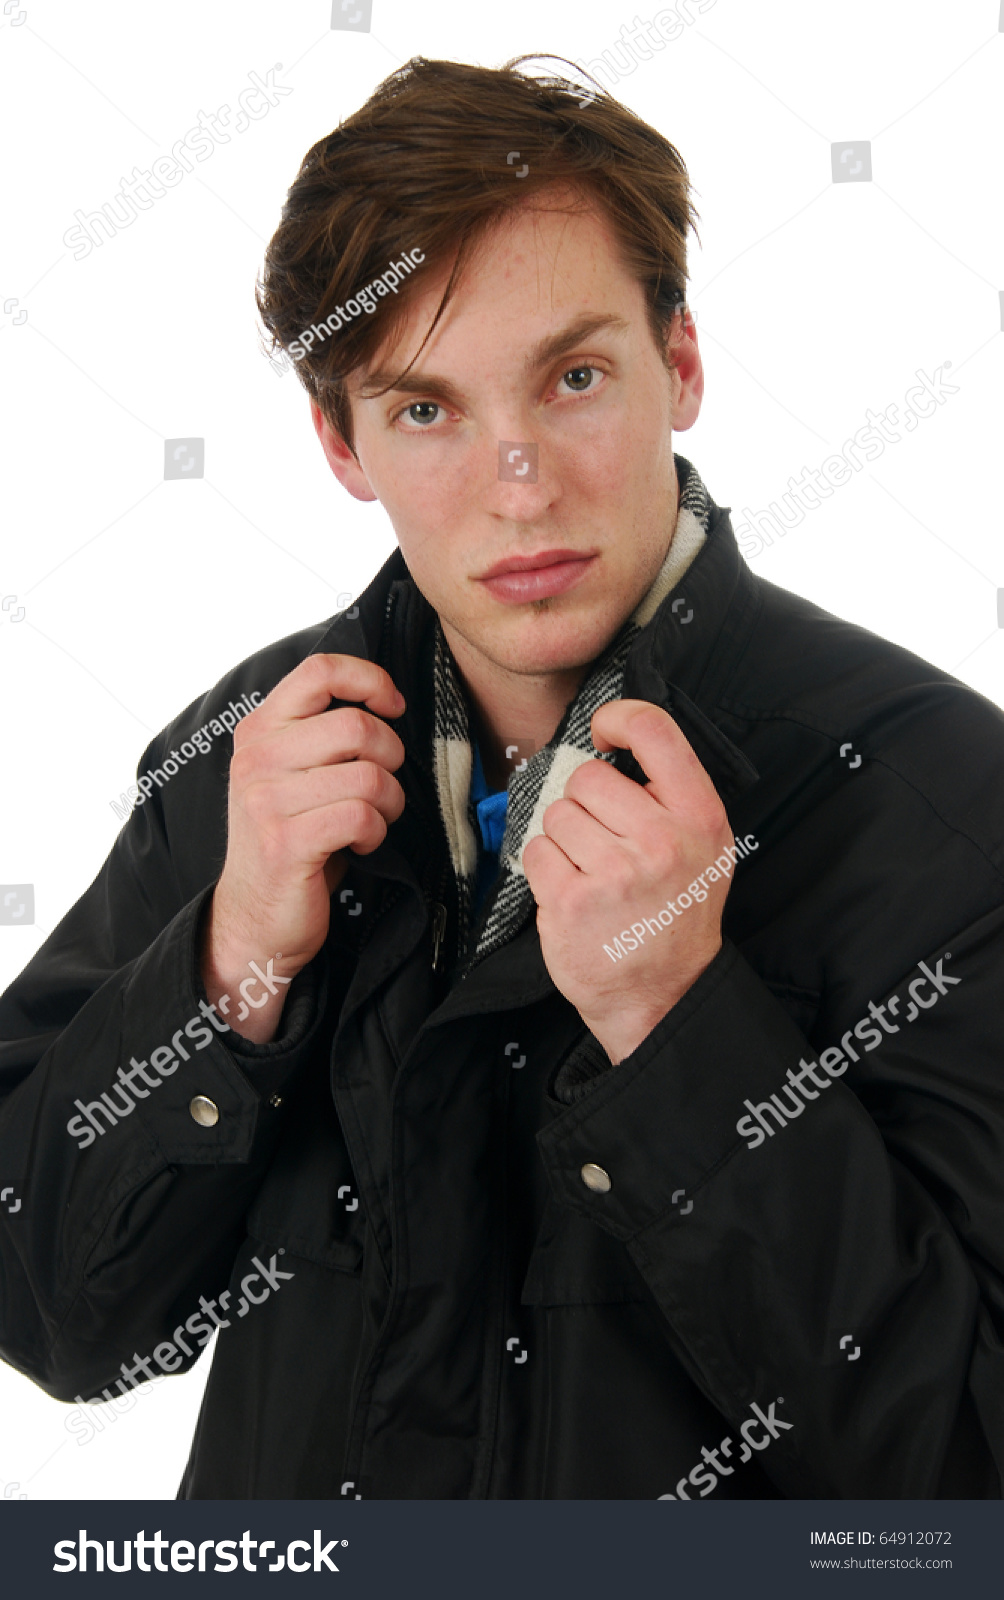 Young Man Pulling His Collar Stock Photo 64912072 - Shutterstock